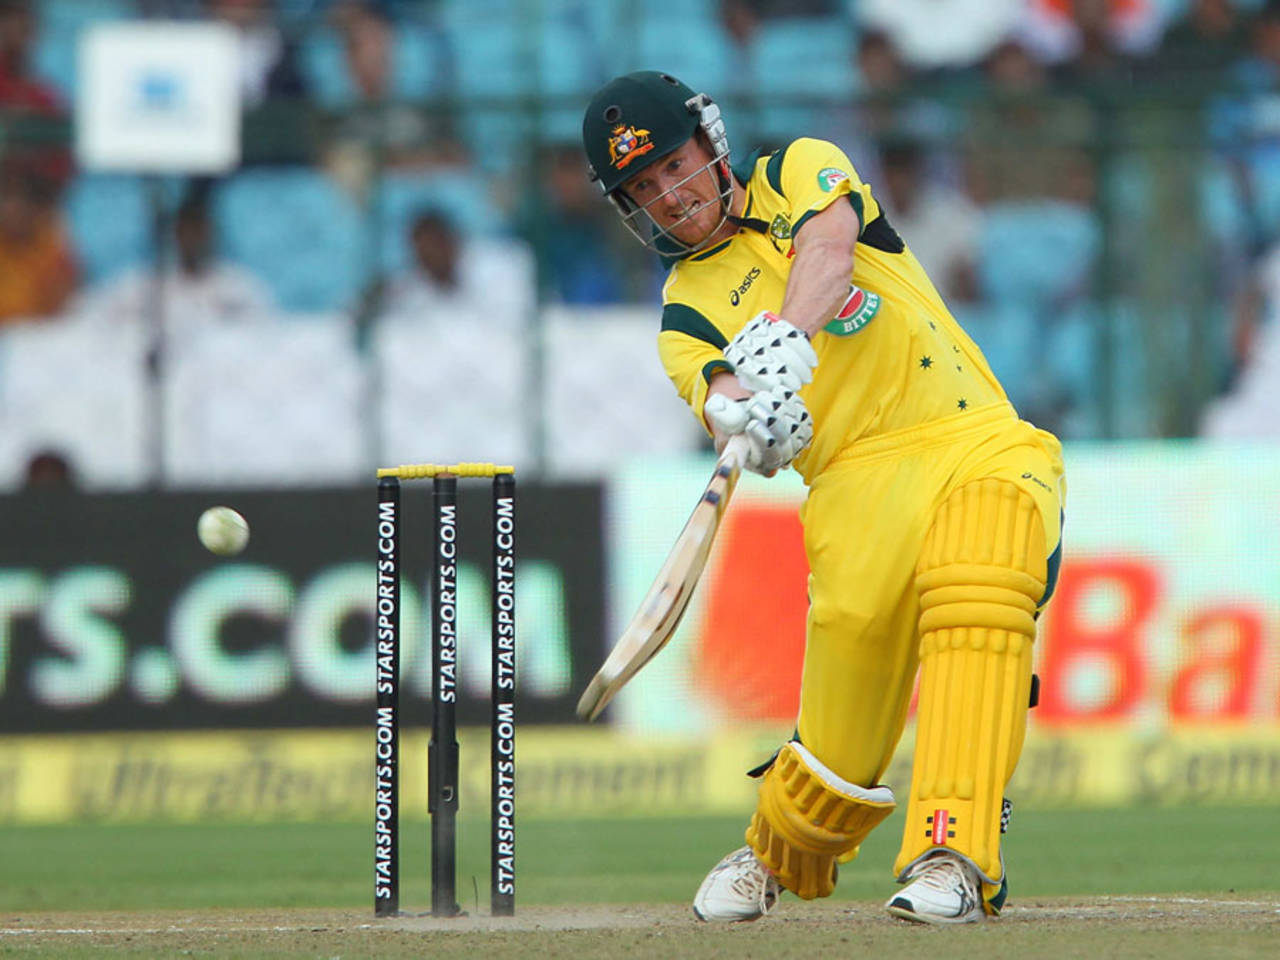 George Bailey scored 40 of his 92 runs in the last five overs, India v Australia, 2nd ODI, Jaipur, October 16, 2013